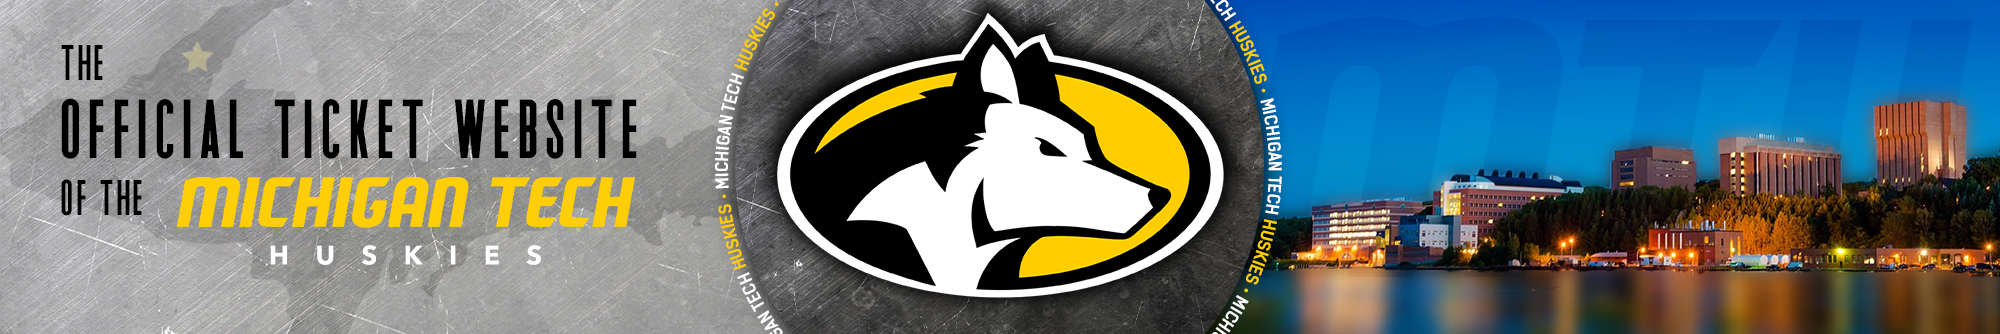 The Official Ticket Website of the Michigan Tech Huskies 